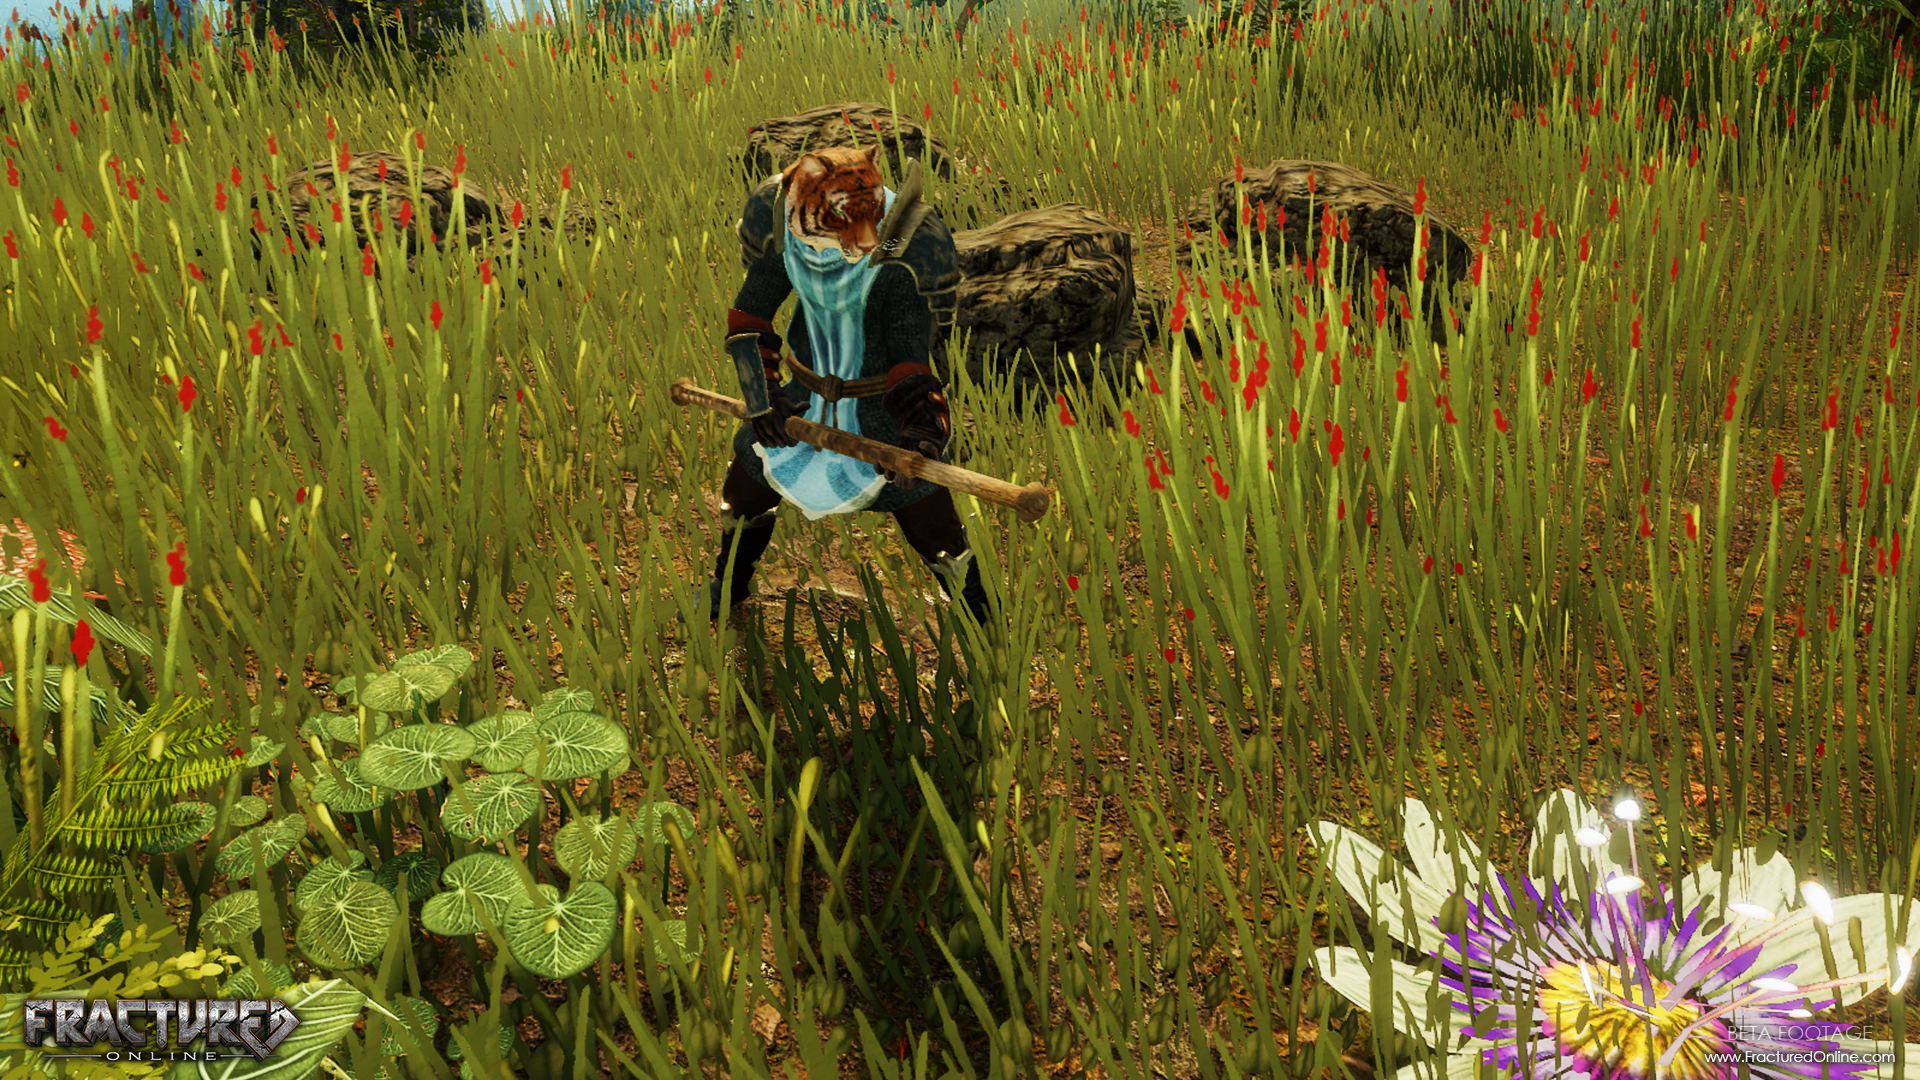 Fractured Previews the Half-Animal Wildfolk Race in Anticipation of Early Access 7